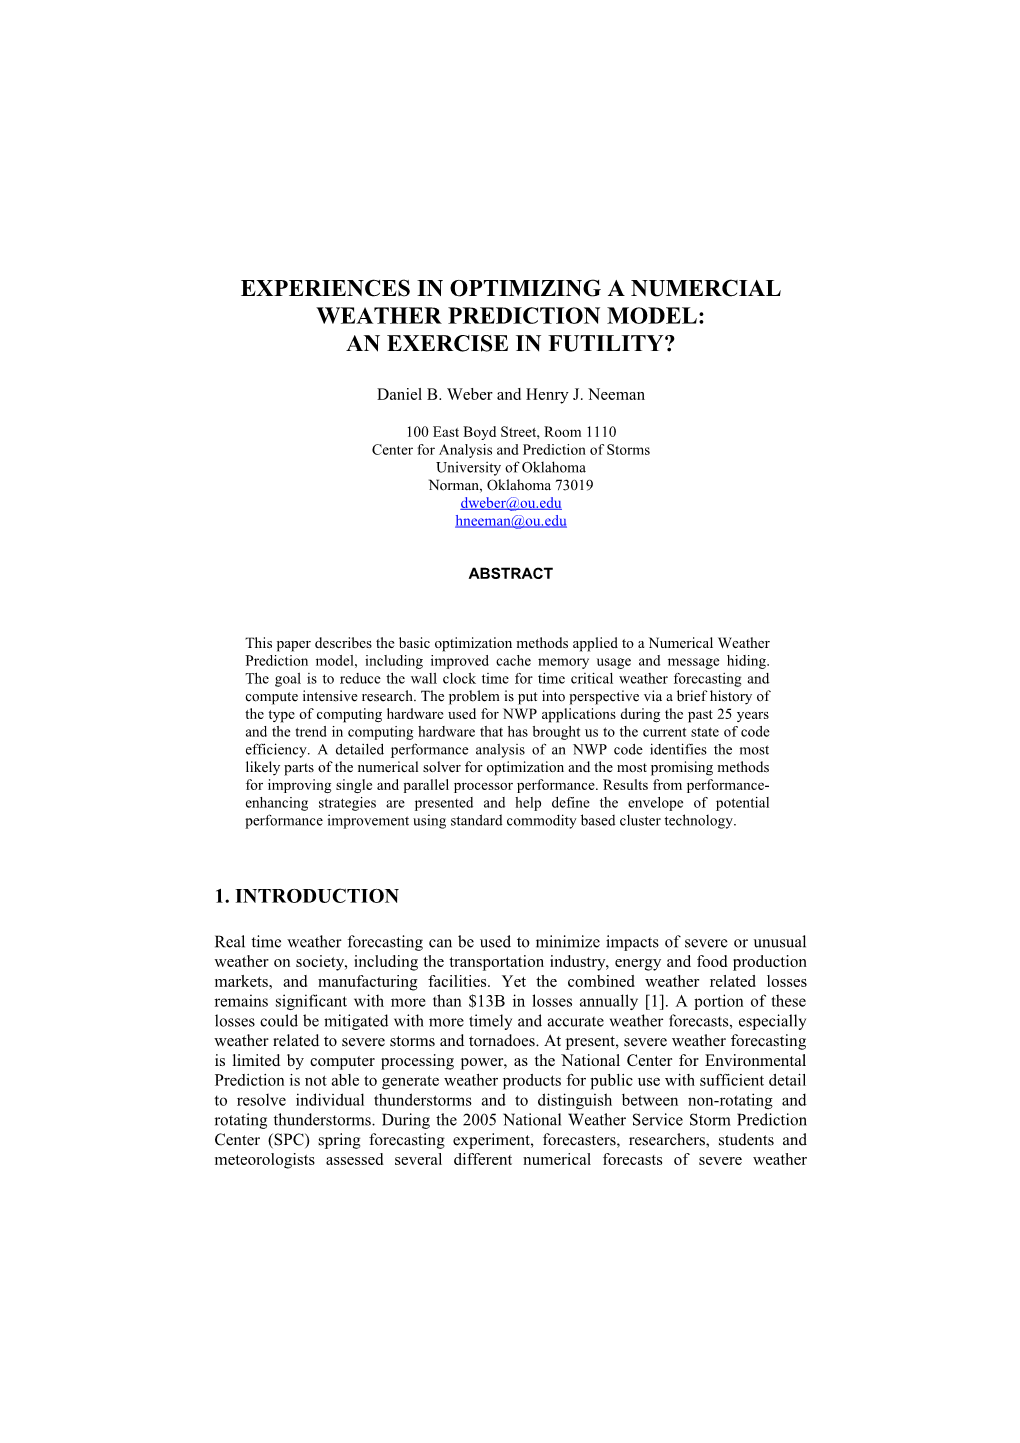 Experiences in Optimizing a Numercial Weather Prediction Model